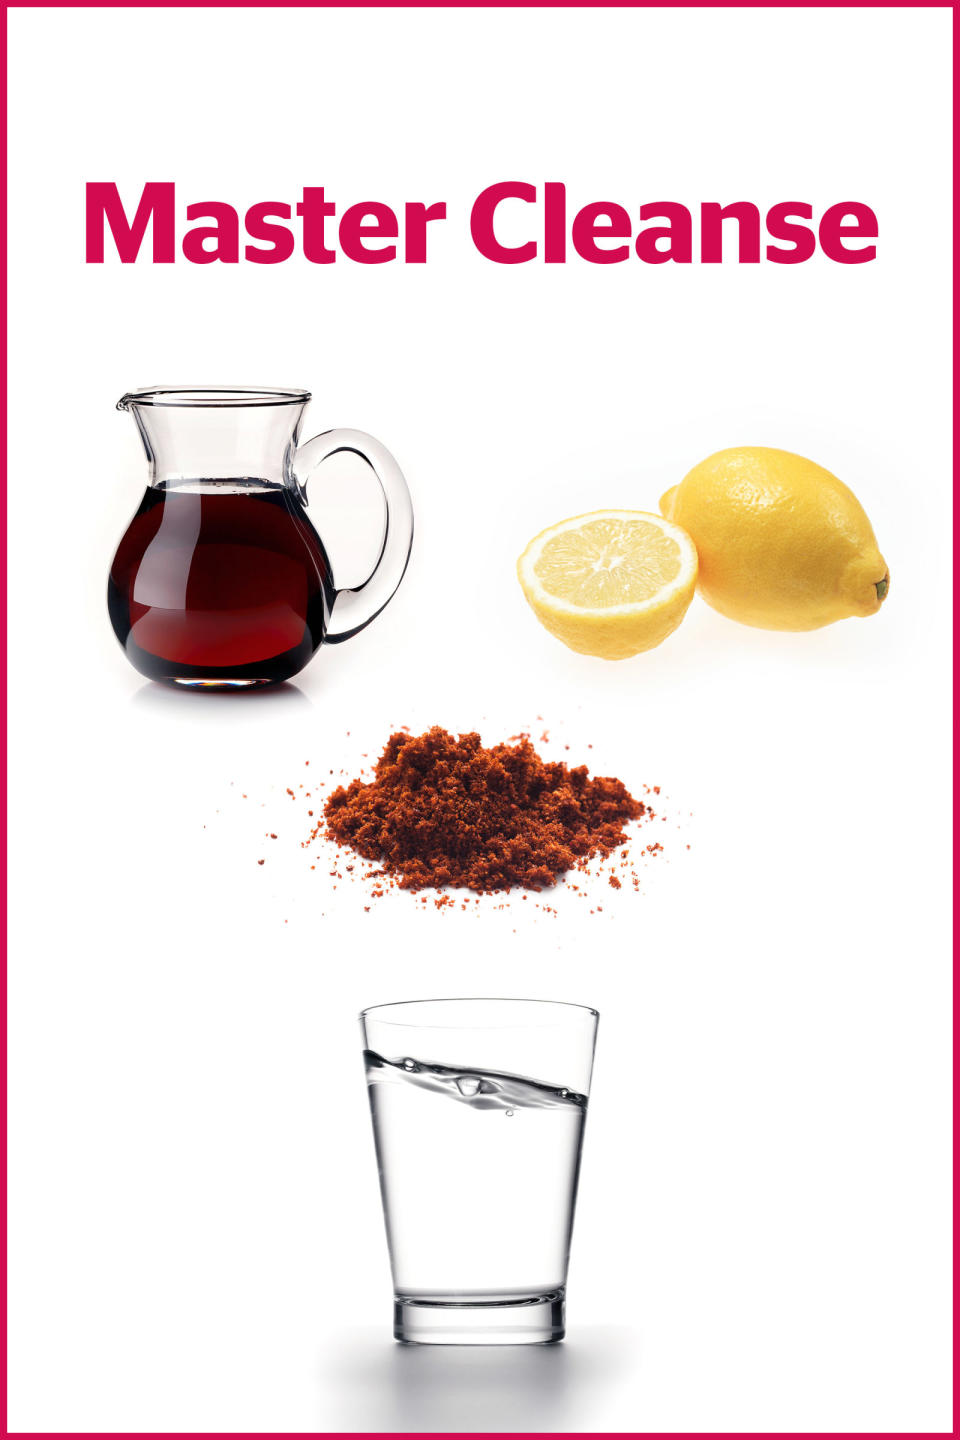 17) The Master Cleanse Doesn't Give Your Body What It Needs